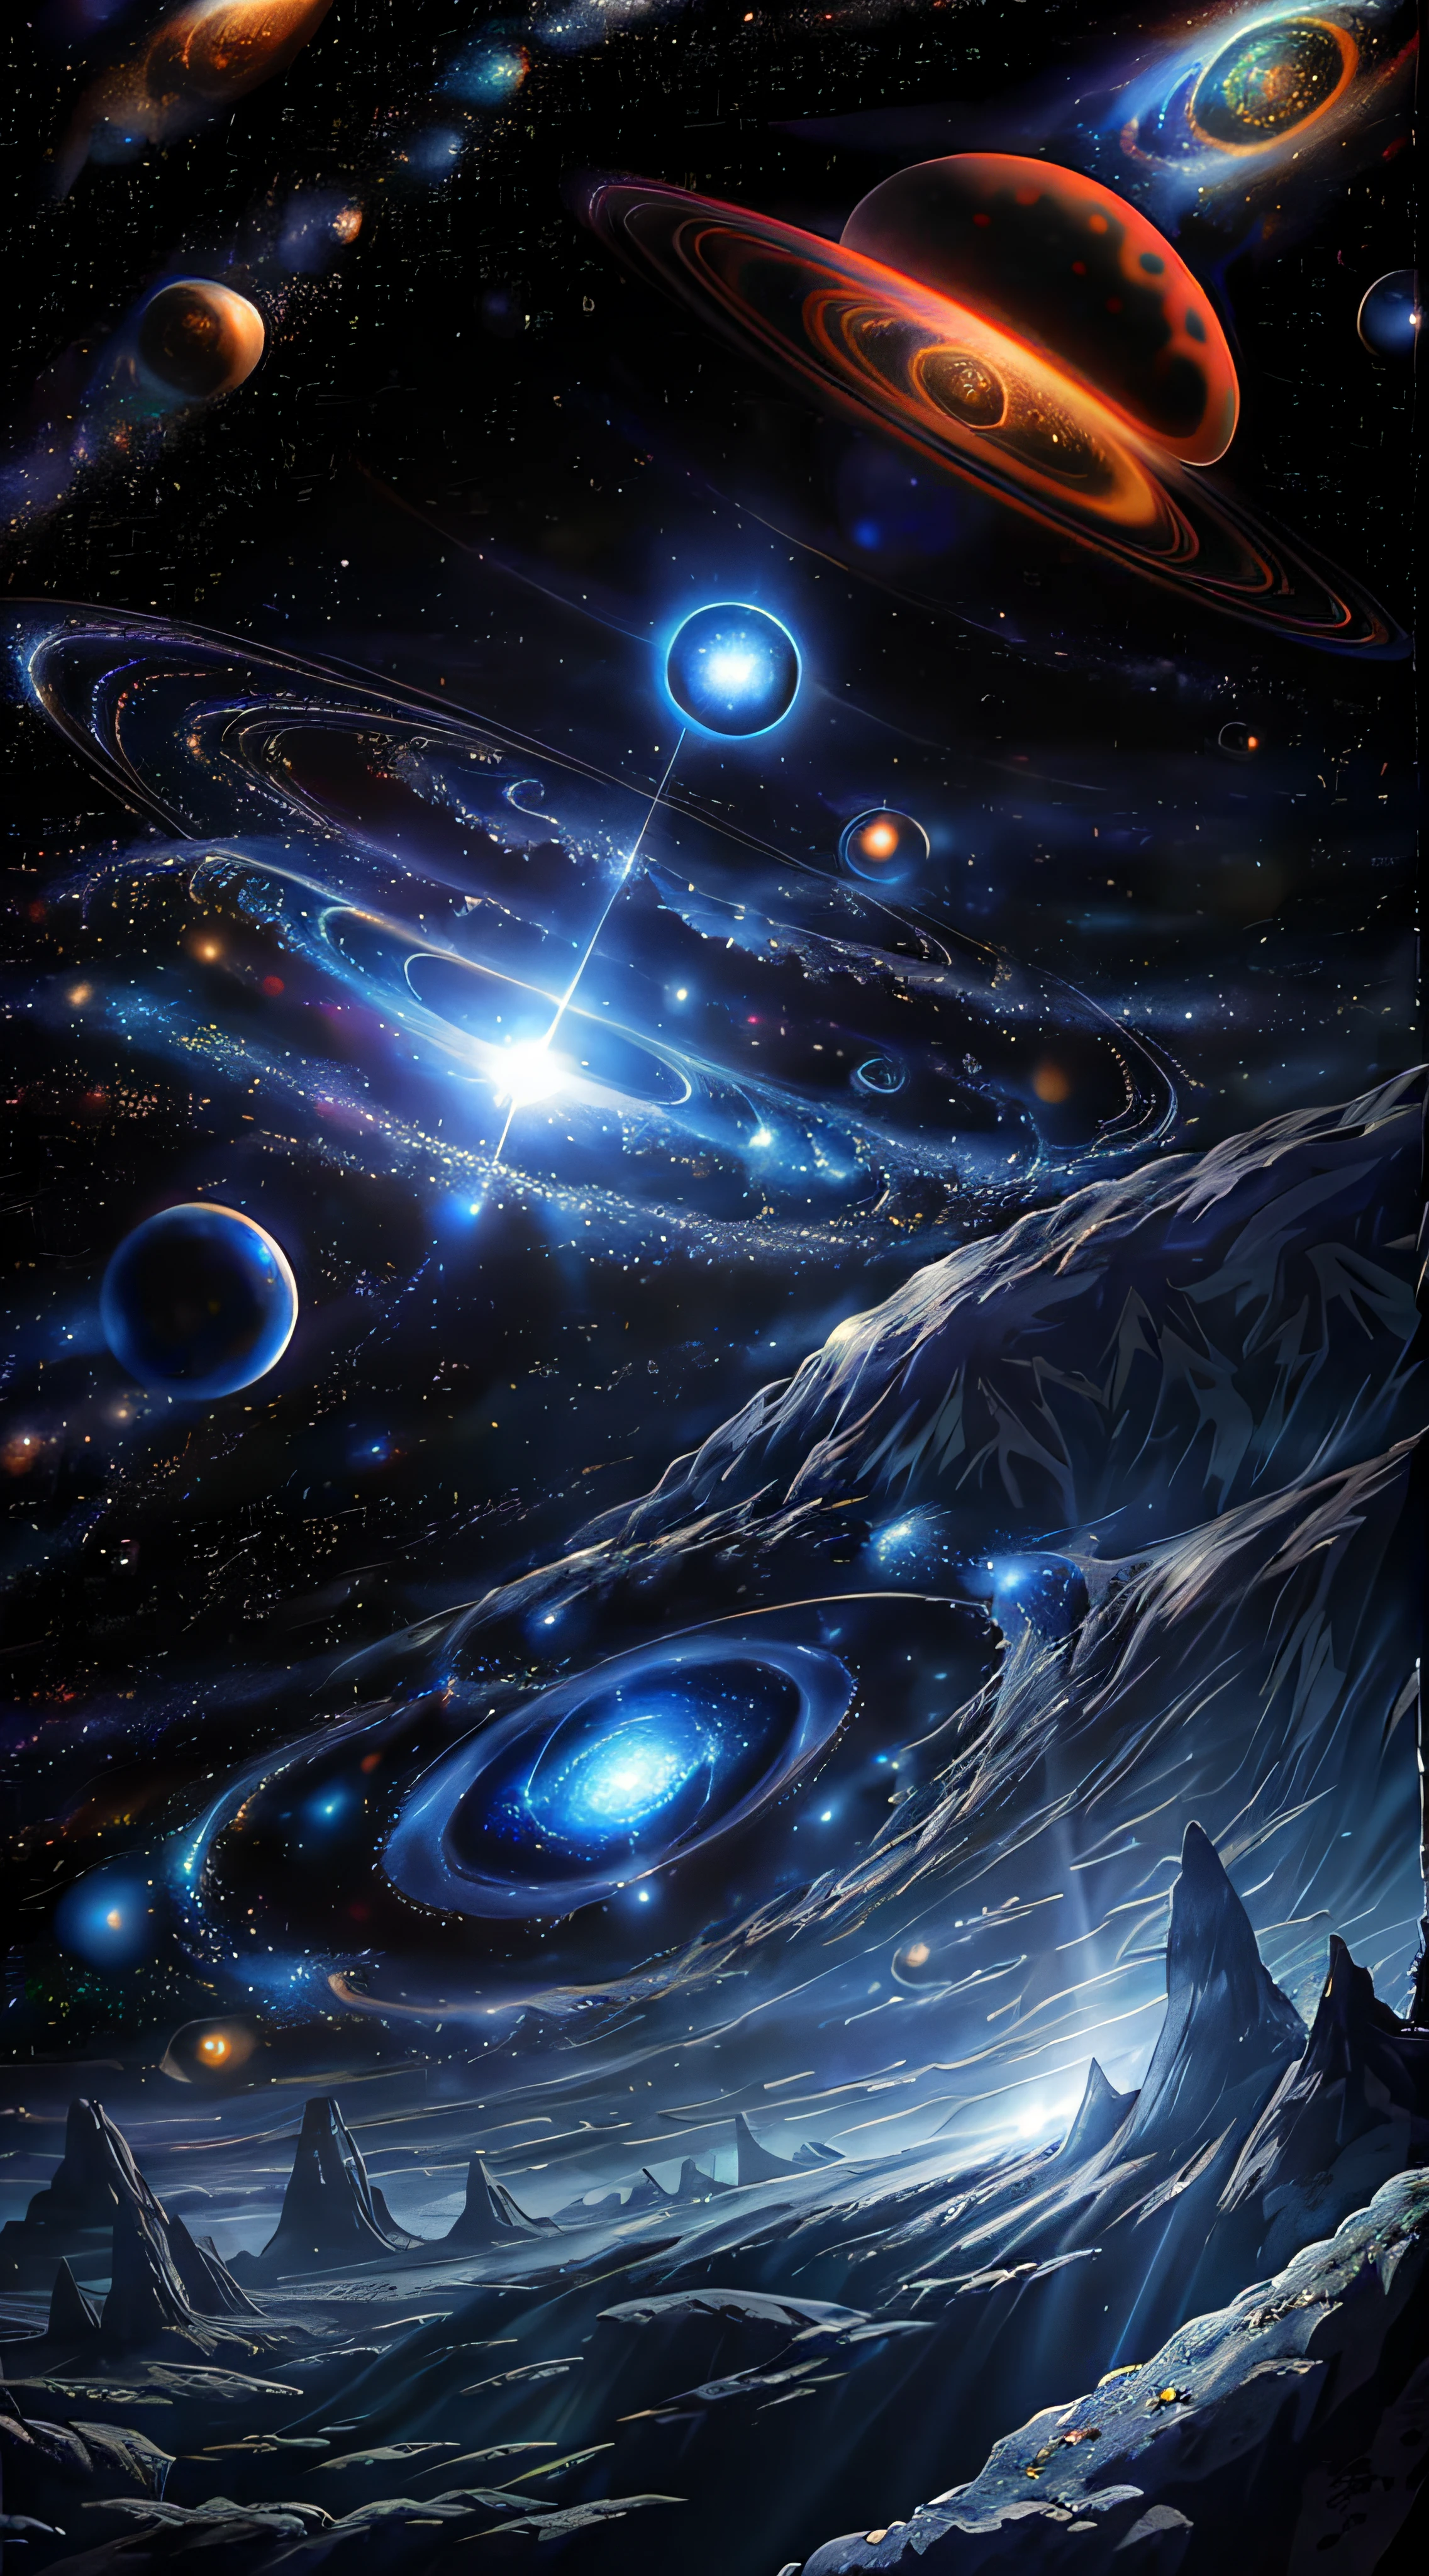 Masterpiece, Best quality, High quality, Extremely detailed Cg Unity 8K wallpaper, Depth of field, hdr,,Photorealistic,Extremely detailed, Intricate, High detail, Universe, space, milky ways, stars, planetes, astronault, kosmos, Celestial, Starcloud, black hole, solar system, cosmic rays, supernova, Deep space, astronomical objects